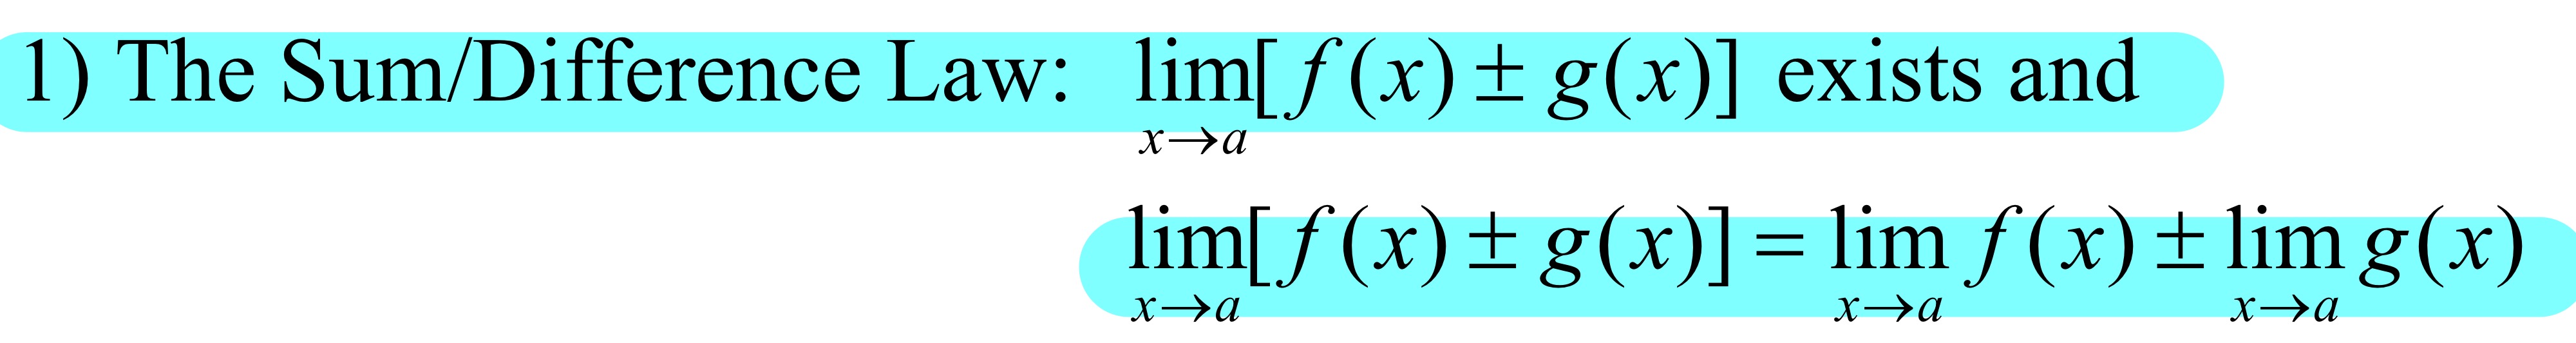 <p>Basic Limit Laws#1: The Sum/Difference Law</p>